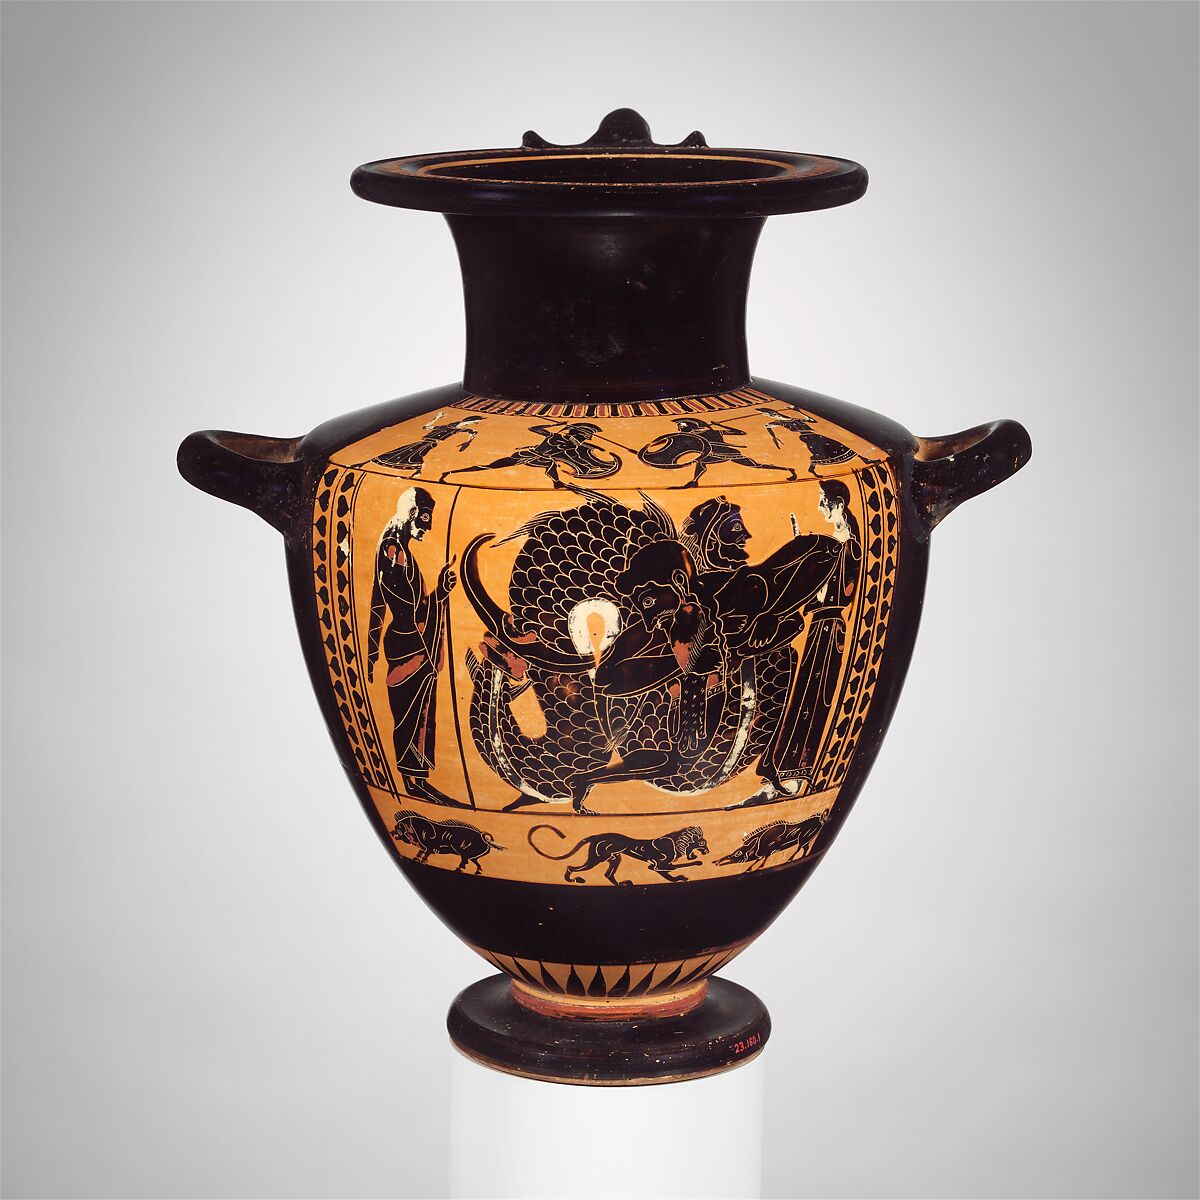 Terracotta hydria (water jar), Attributed to an artist related to the Antimenes Painter, Terracotta, Greek, Attic 